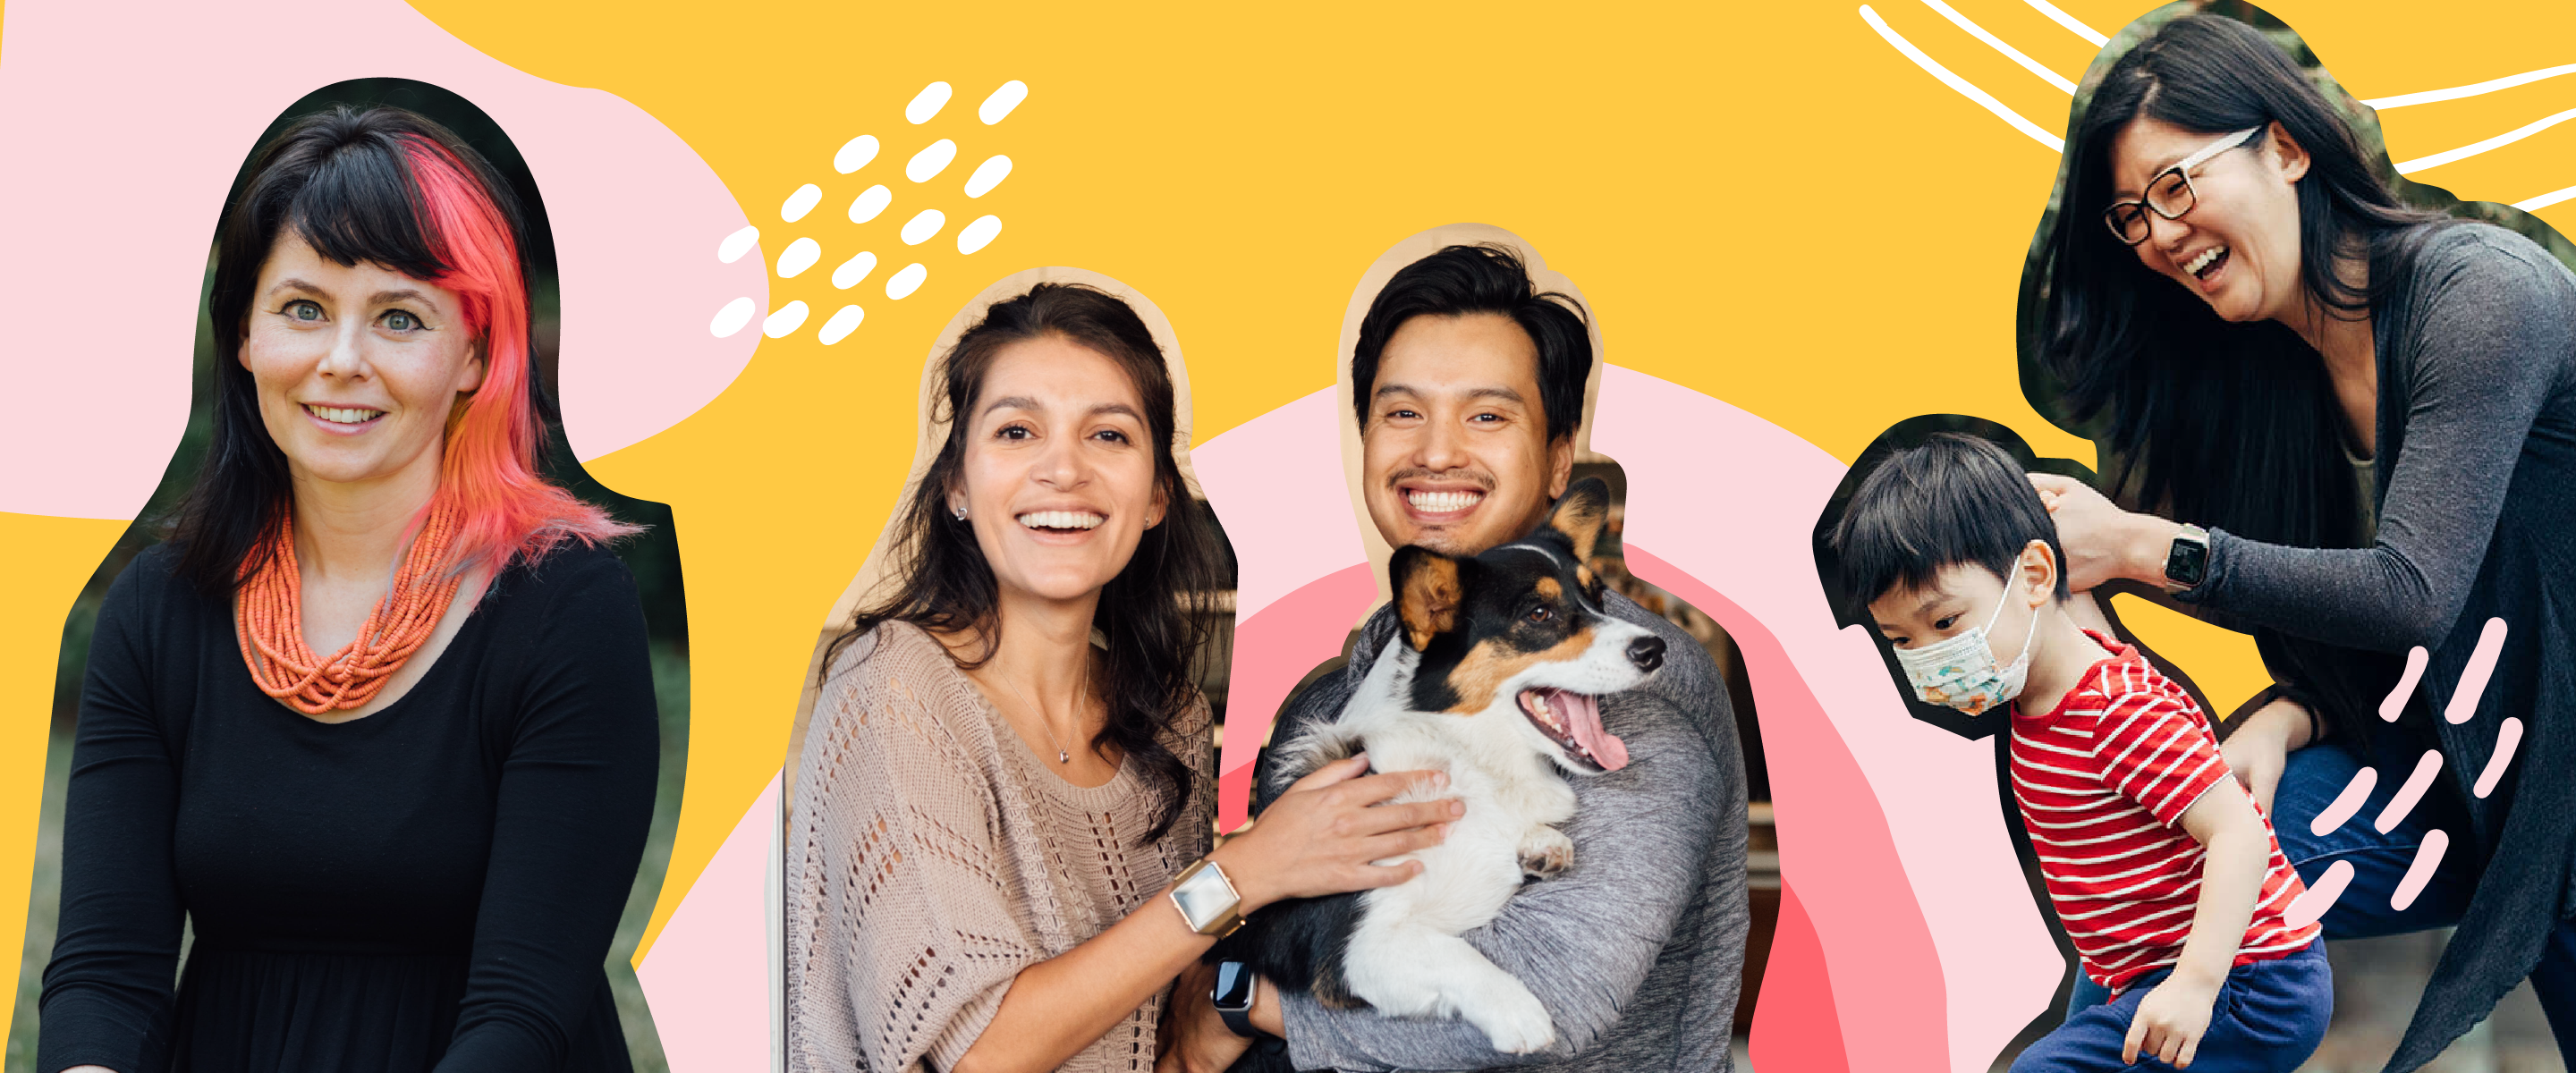 Cutouts of various smiling people and a dog on a yellow illustrative background.